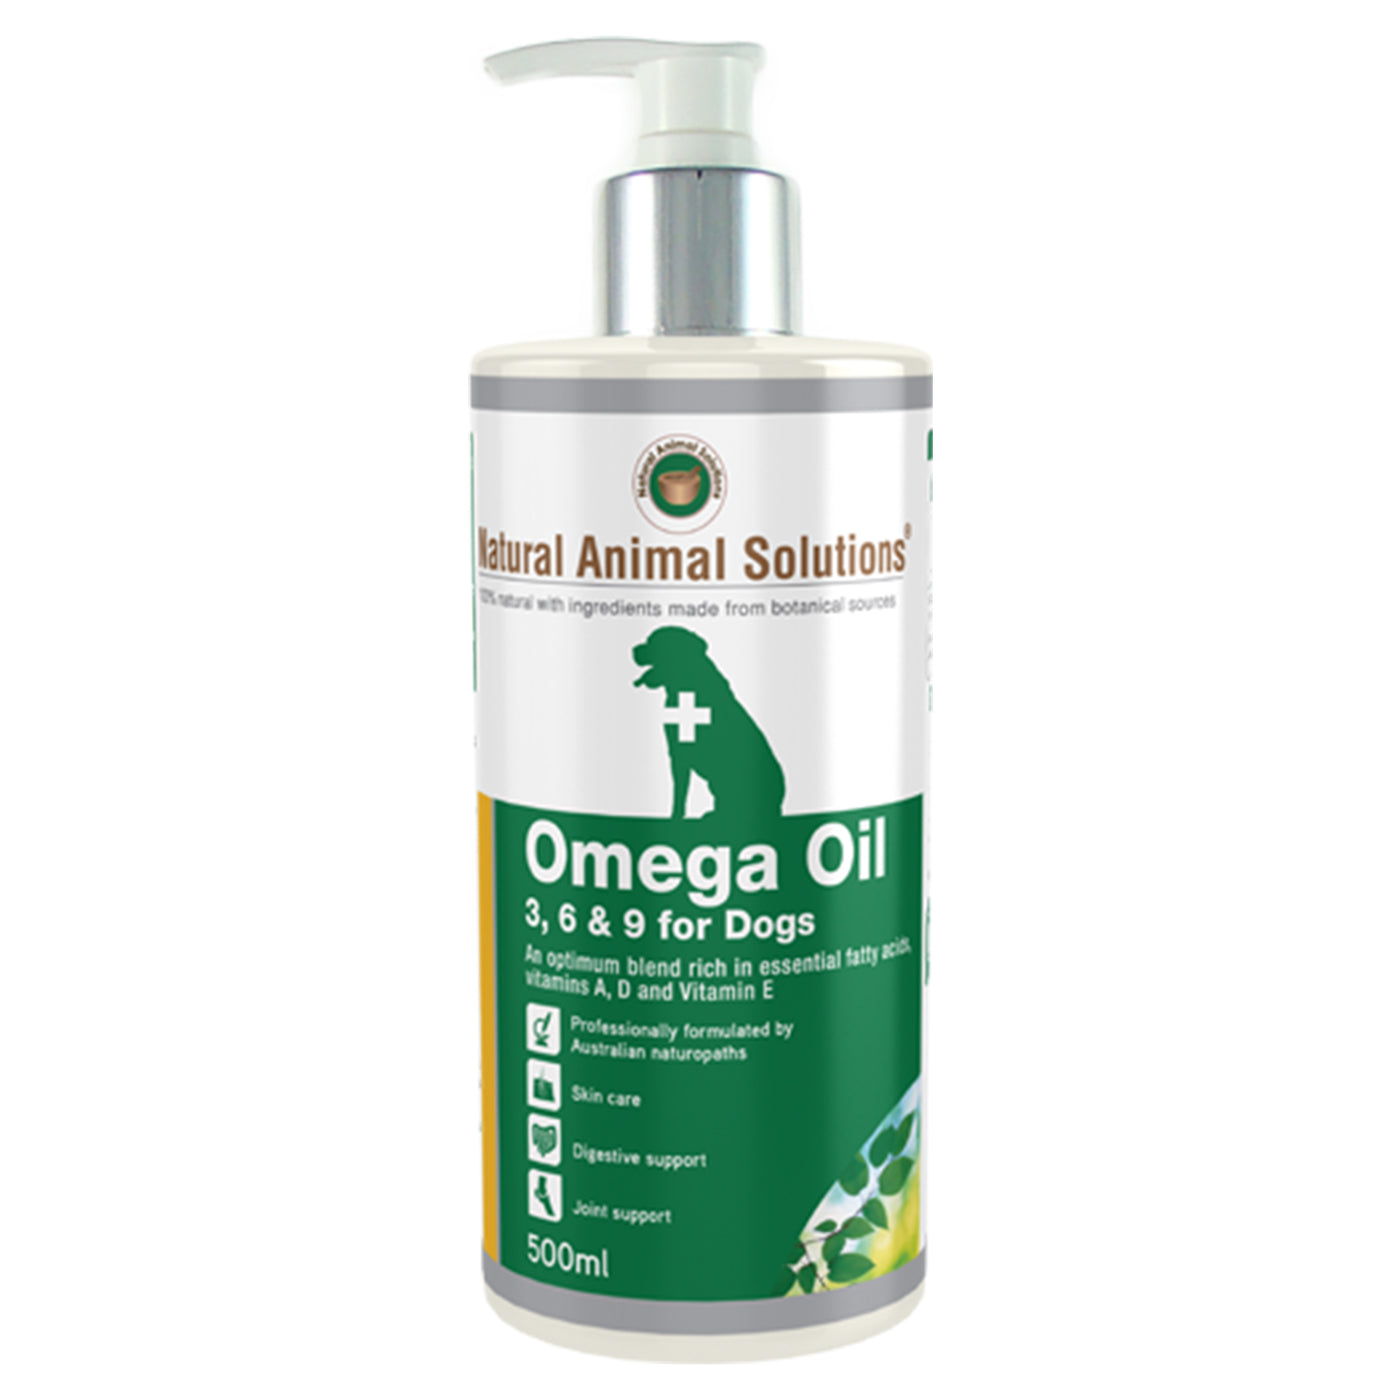 Natural Animal Solutions (NAS) Omega 3 6 And 9 Oil For Dog and Horse